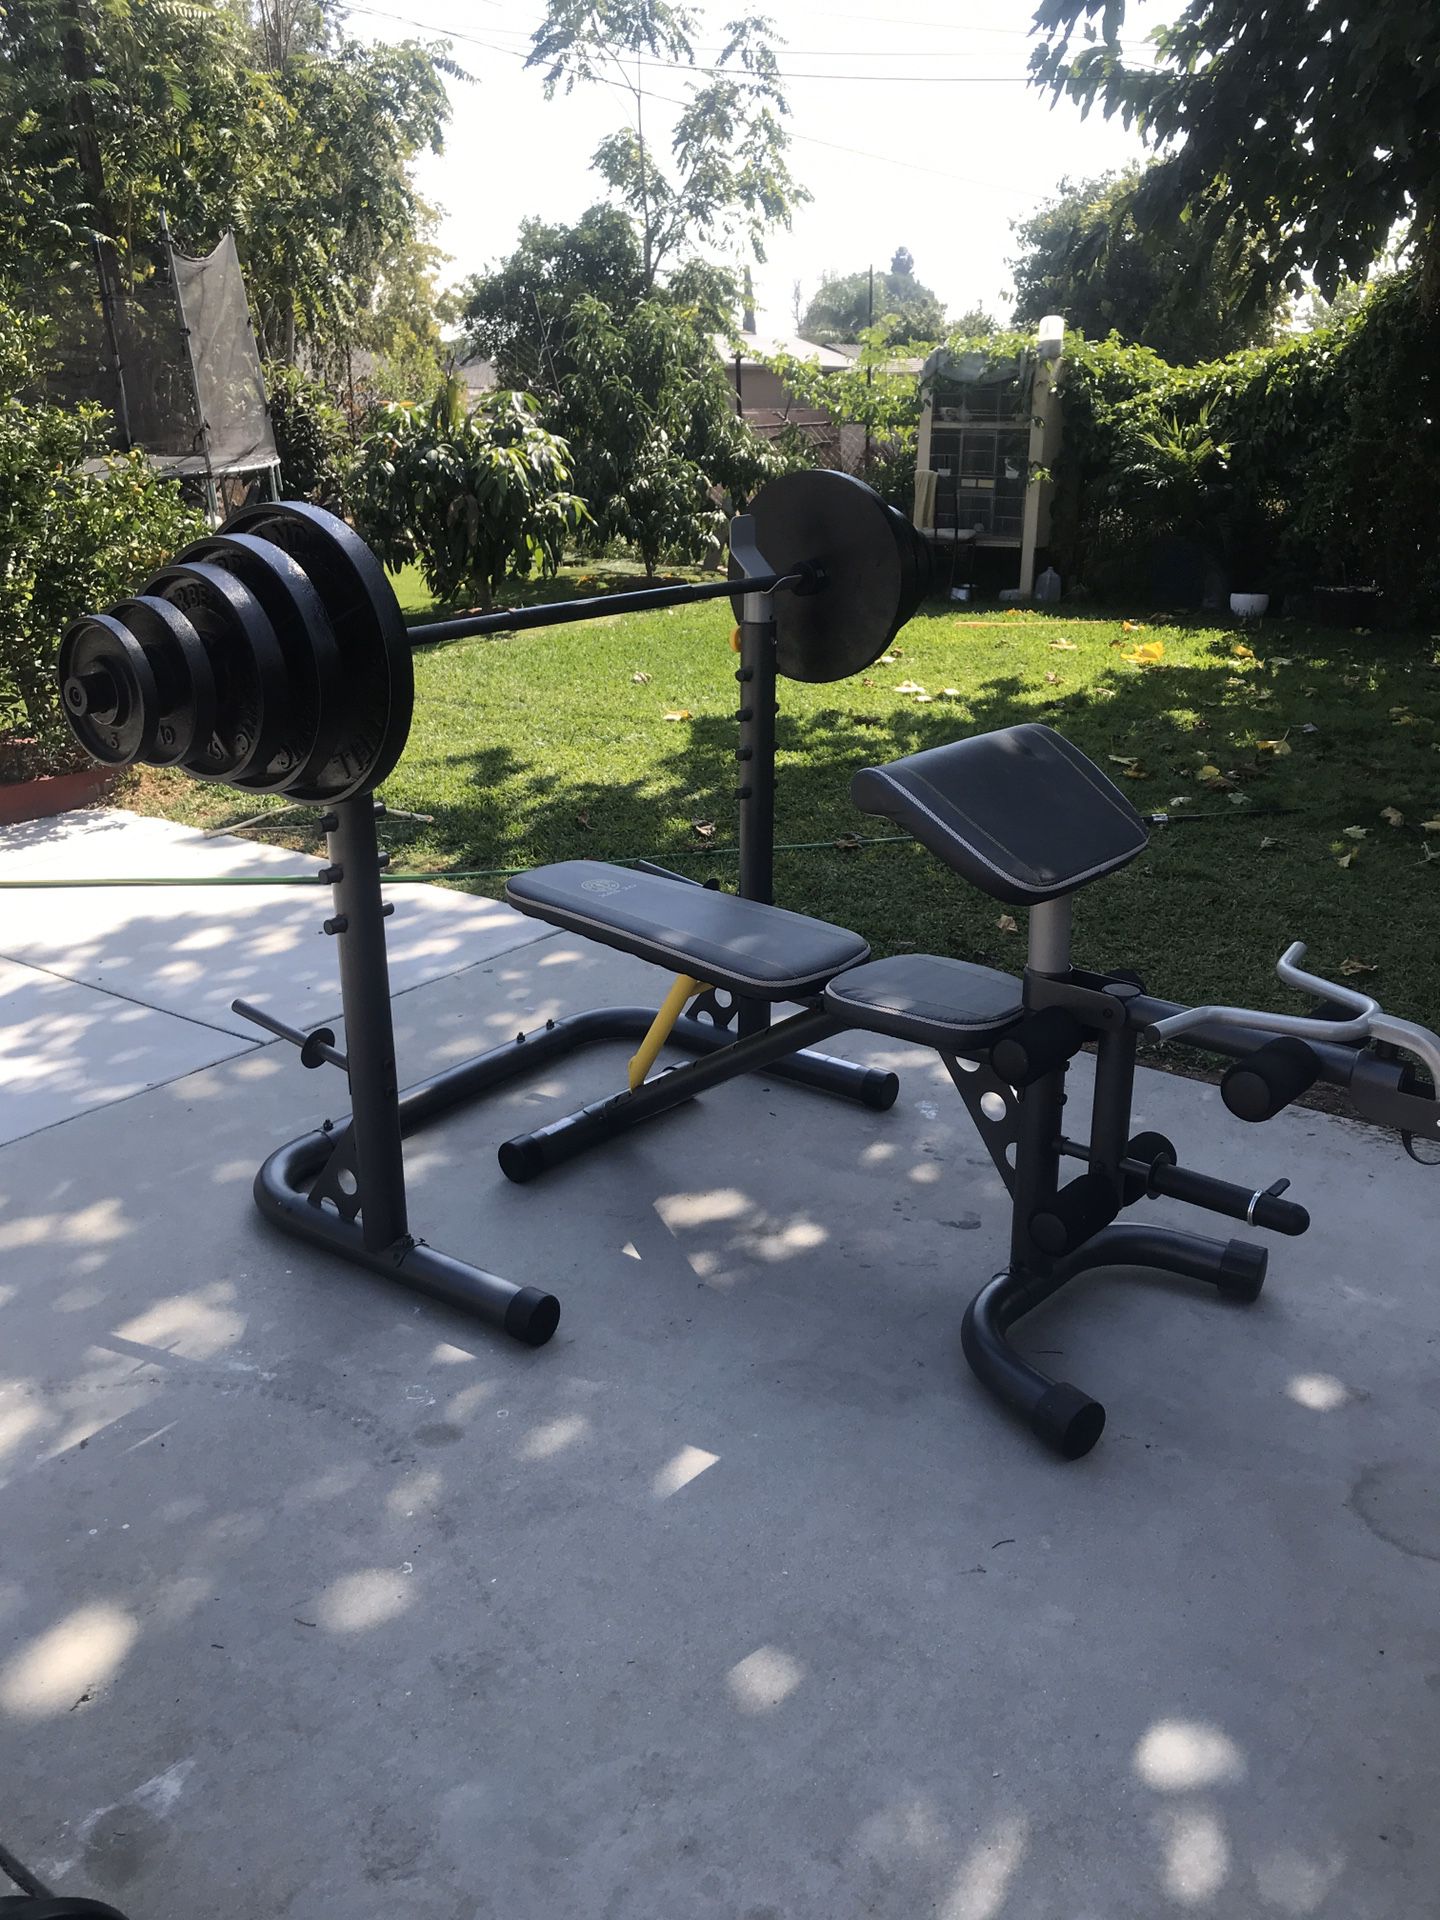 squat rack/weight bench with olympic bar and weights